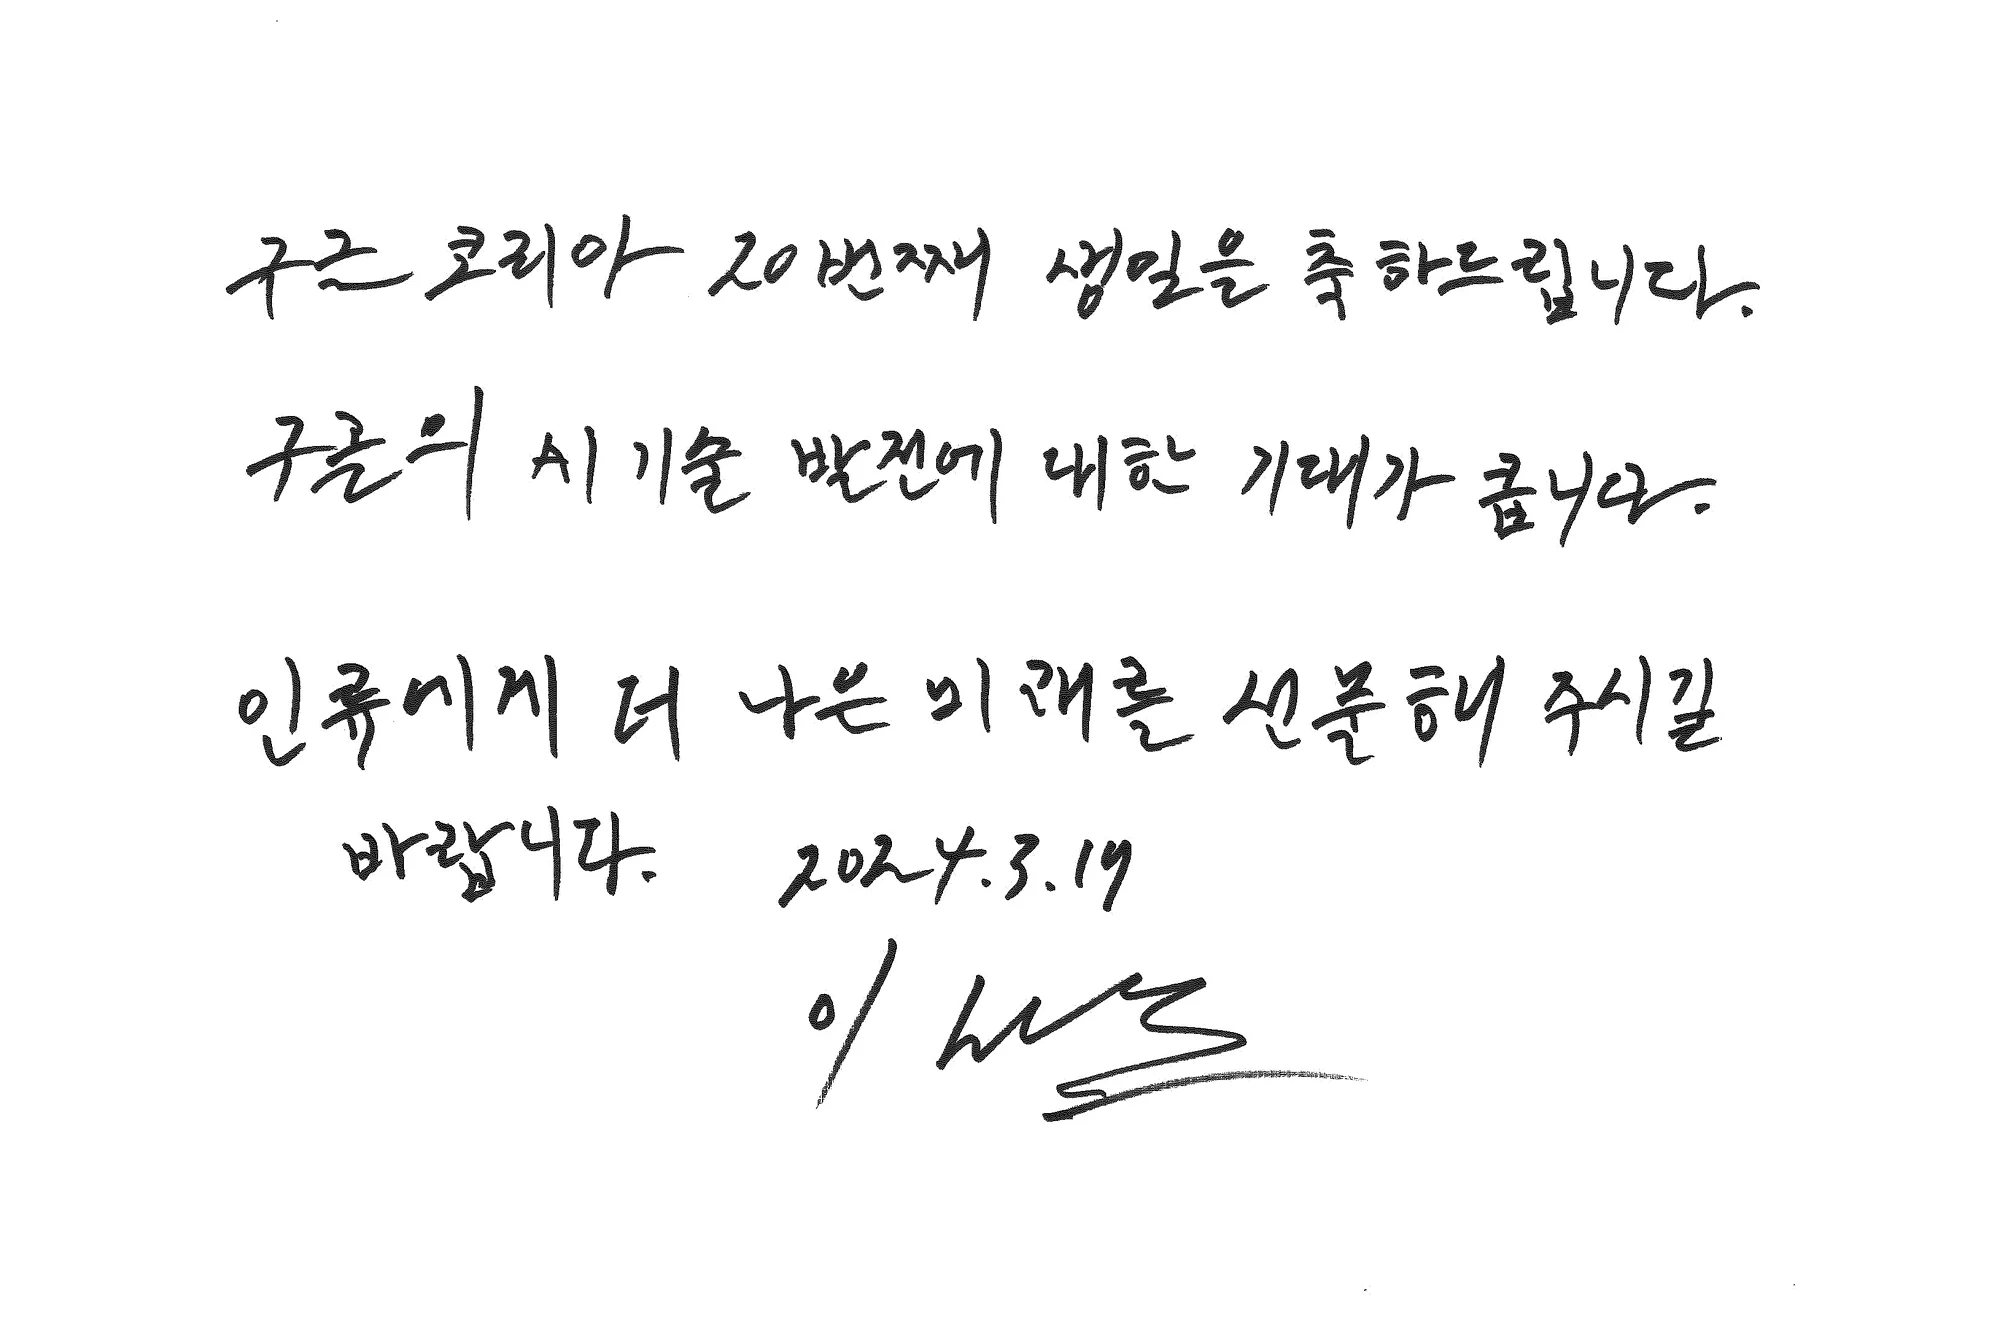 A handwritten note with blank ink on white paper, with Korean characters.